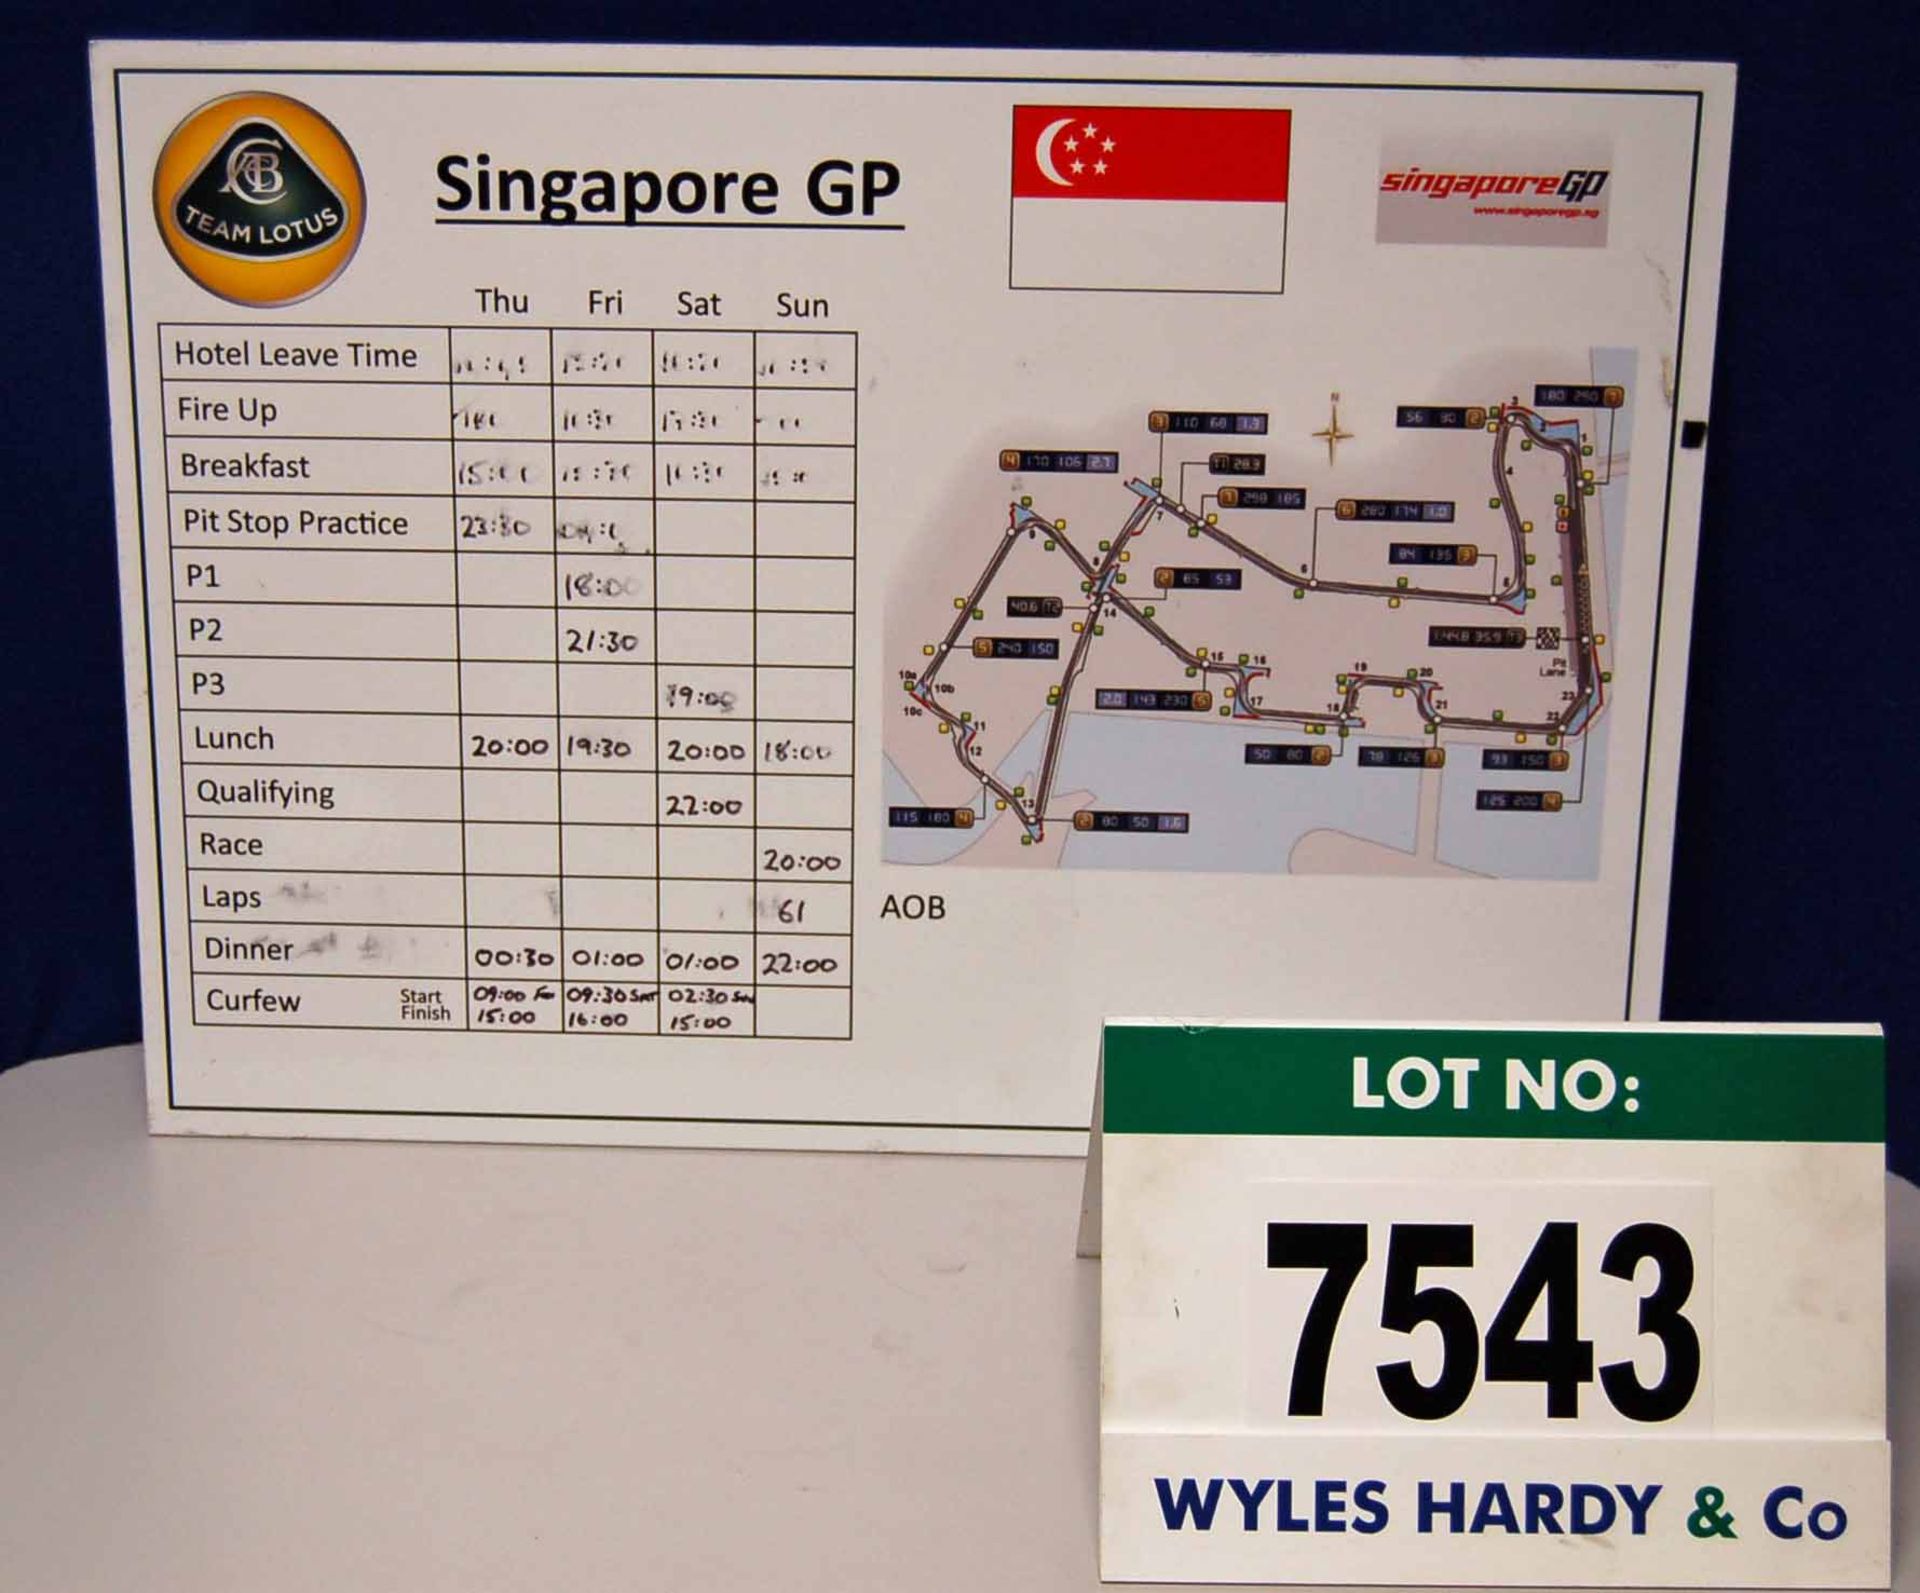 A 700mm x 500mm TEAM LOTUS Pit Crew Information Board - Singapore Grand Prix  Want it shipped?